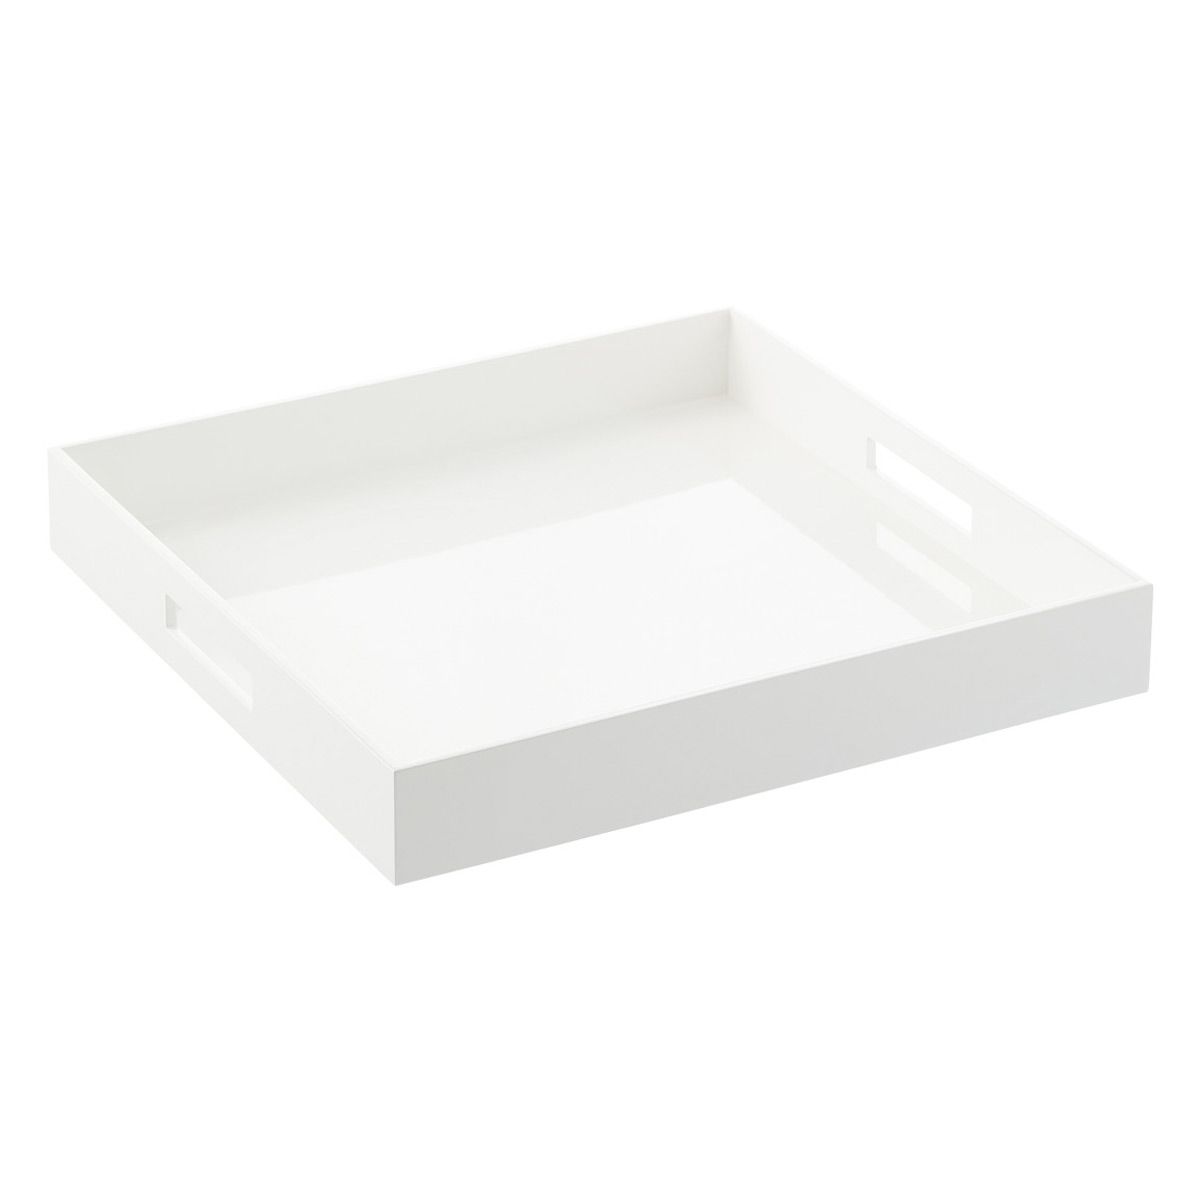 Square Lacquer Tray White | The Container Store